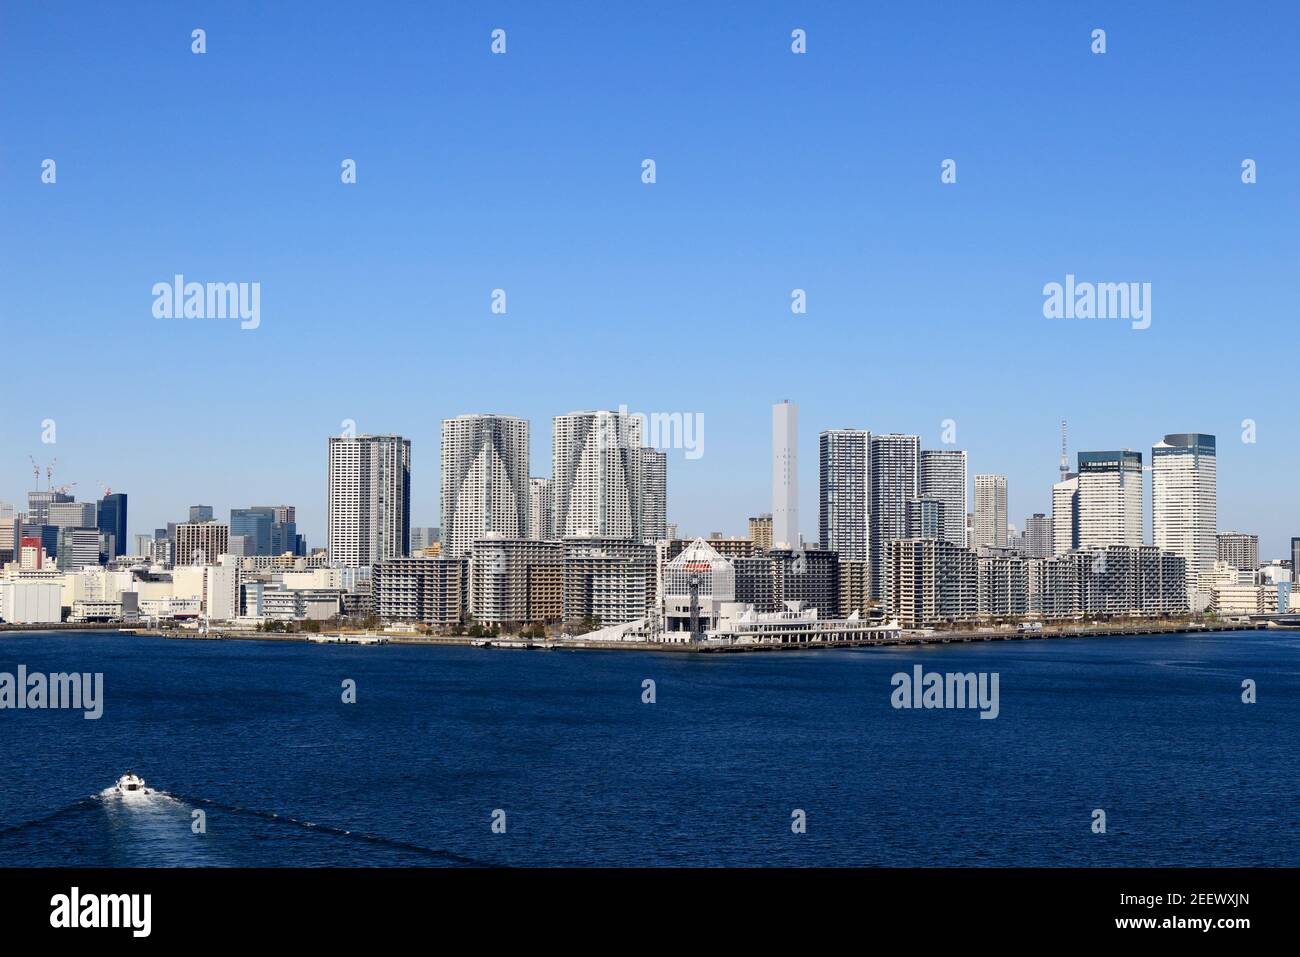 A view of the apartment houses in the bay area lined up from Harumi to Kachidoki, which can be seen from the Rainbow Bridge in Tokyo Bay Stock Photo